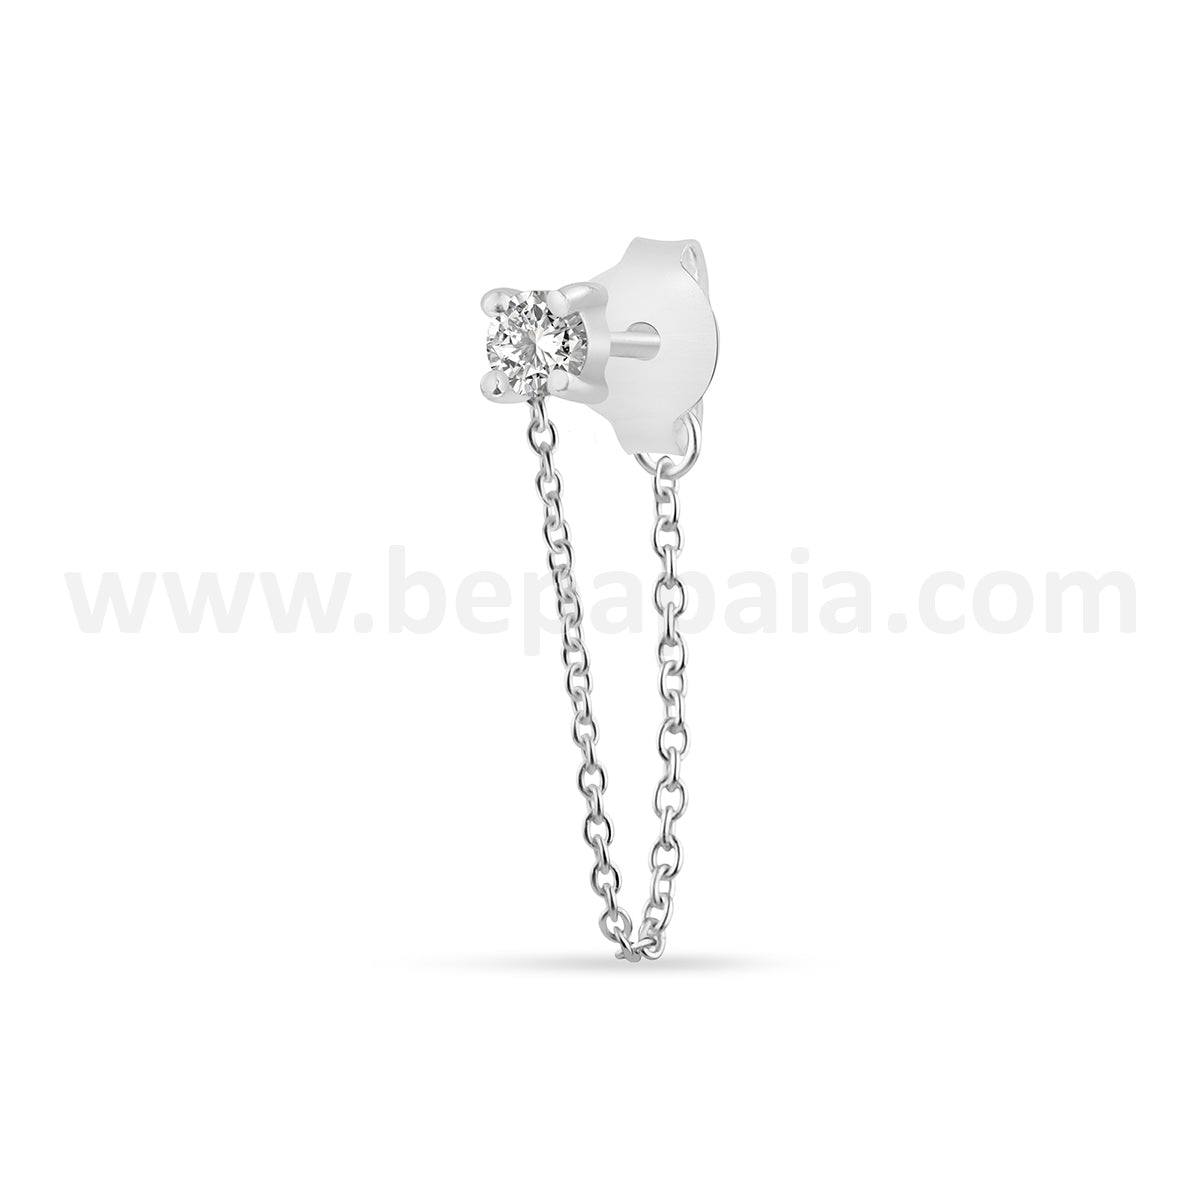 Silver ear stud with mix zirconias and chain